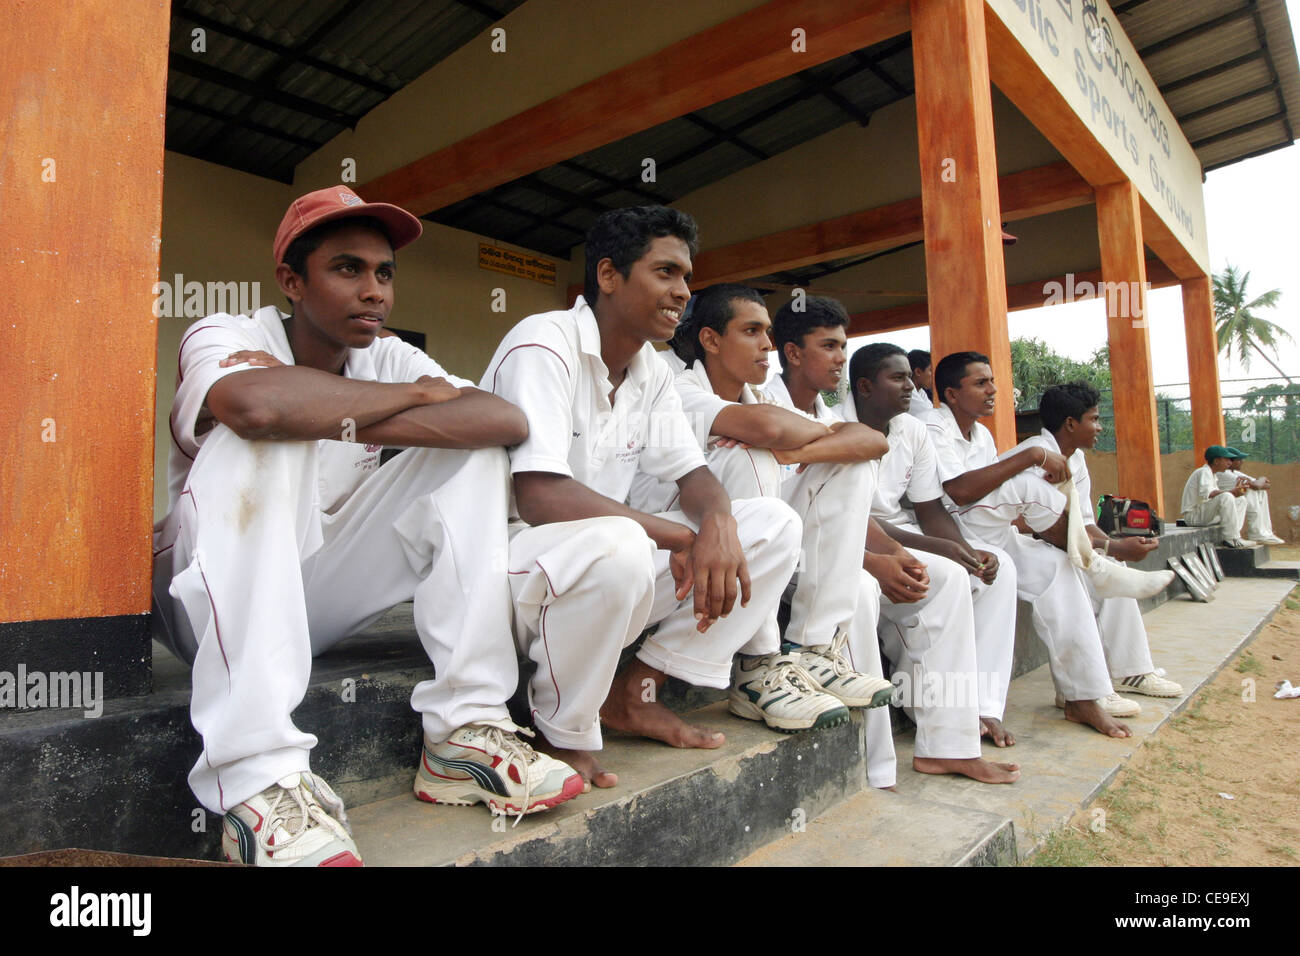 A young Sri Lankan Amateur Cricket Team watch a game from the stands, Galle, Sri Lanka Stock Photo